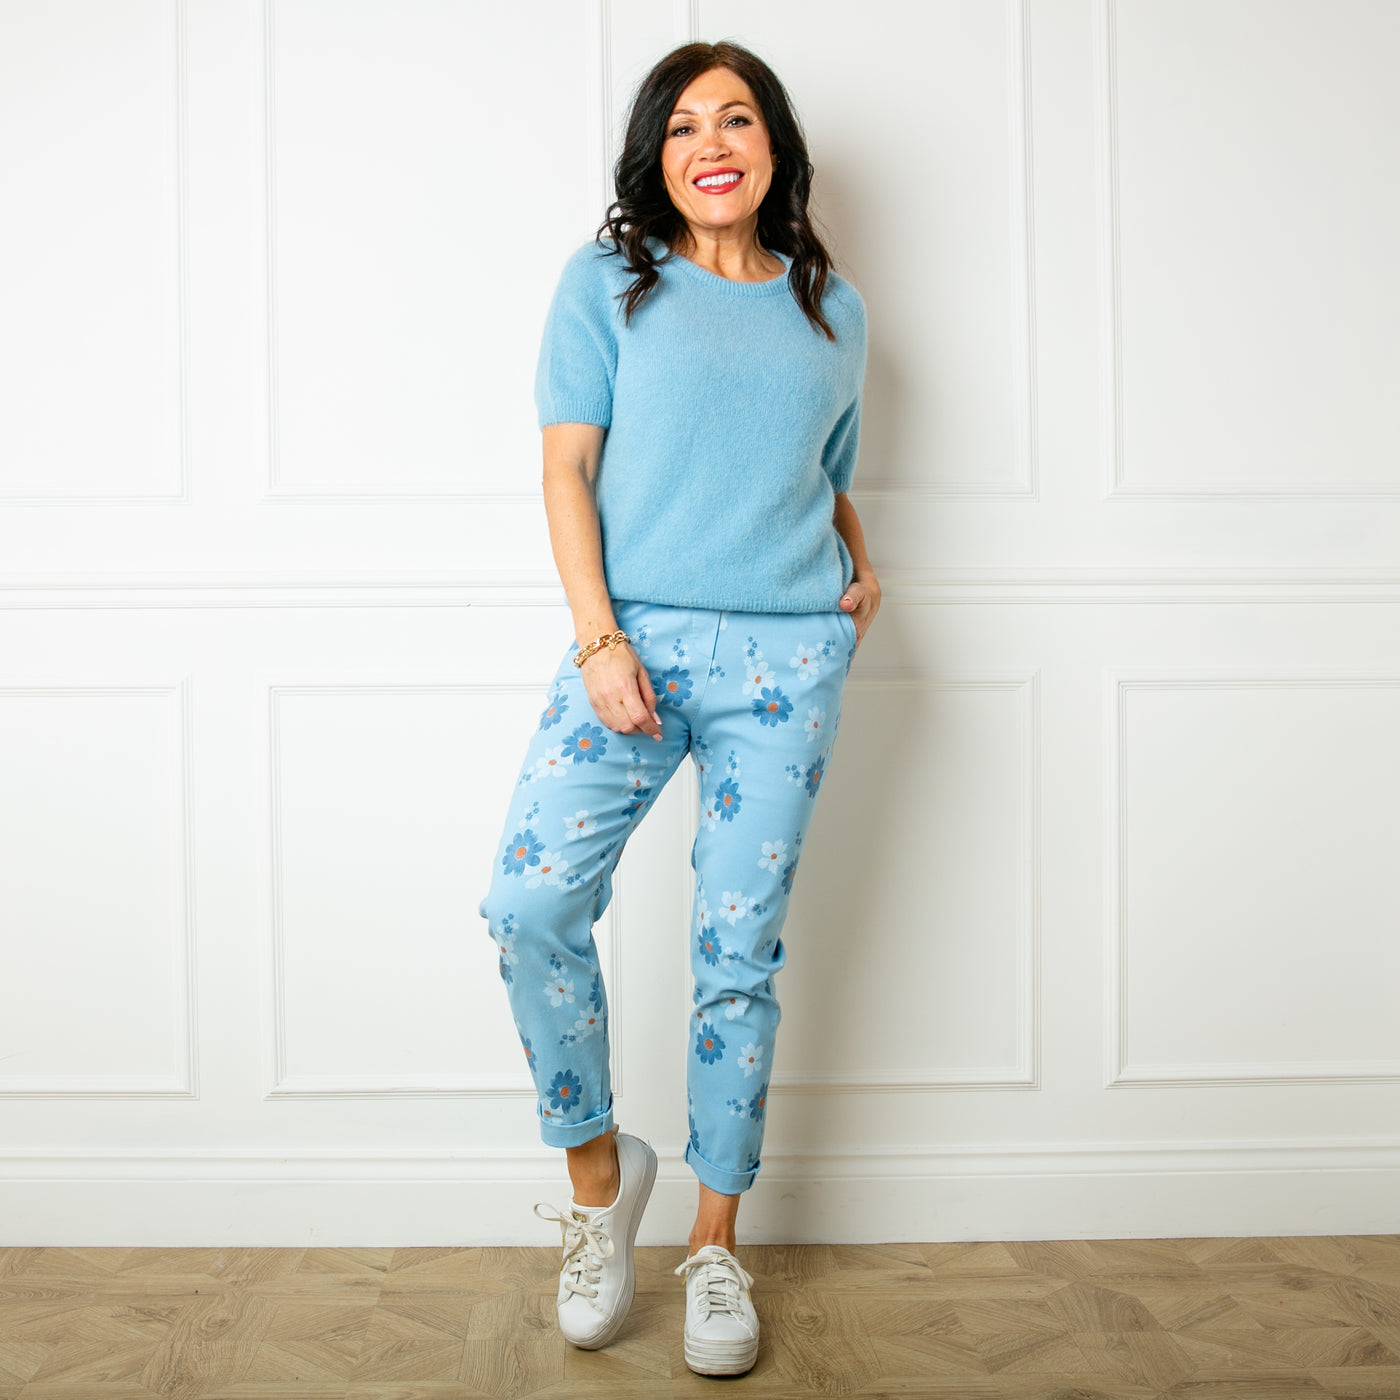 The powder blue Suri Alpaca Mix Short Sleeve Jumper, super soft and made from a blend of alpaca, wool, nylon, acrylic  and elastic for added stretch